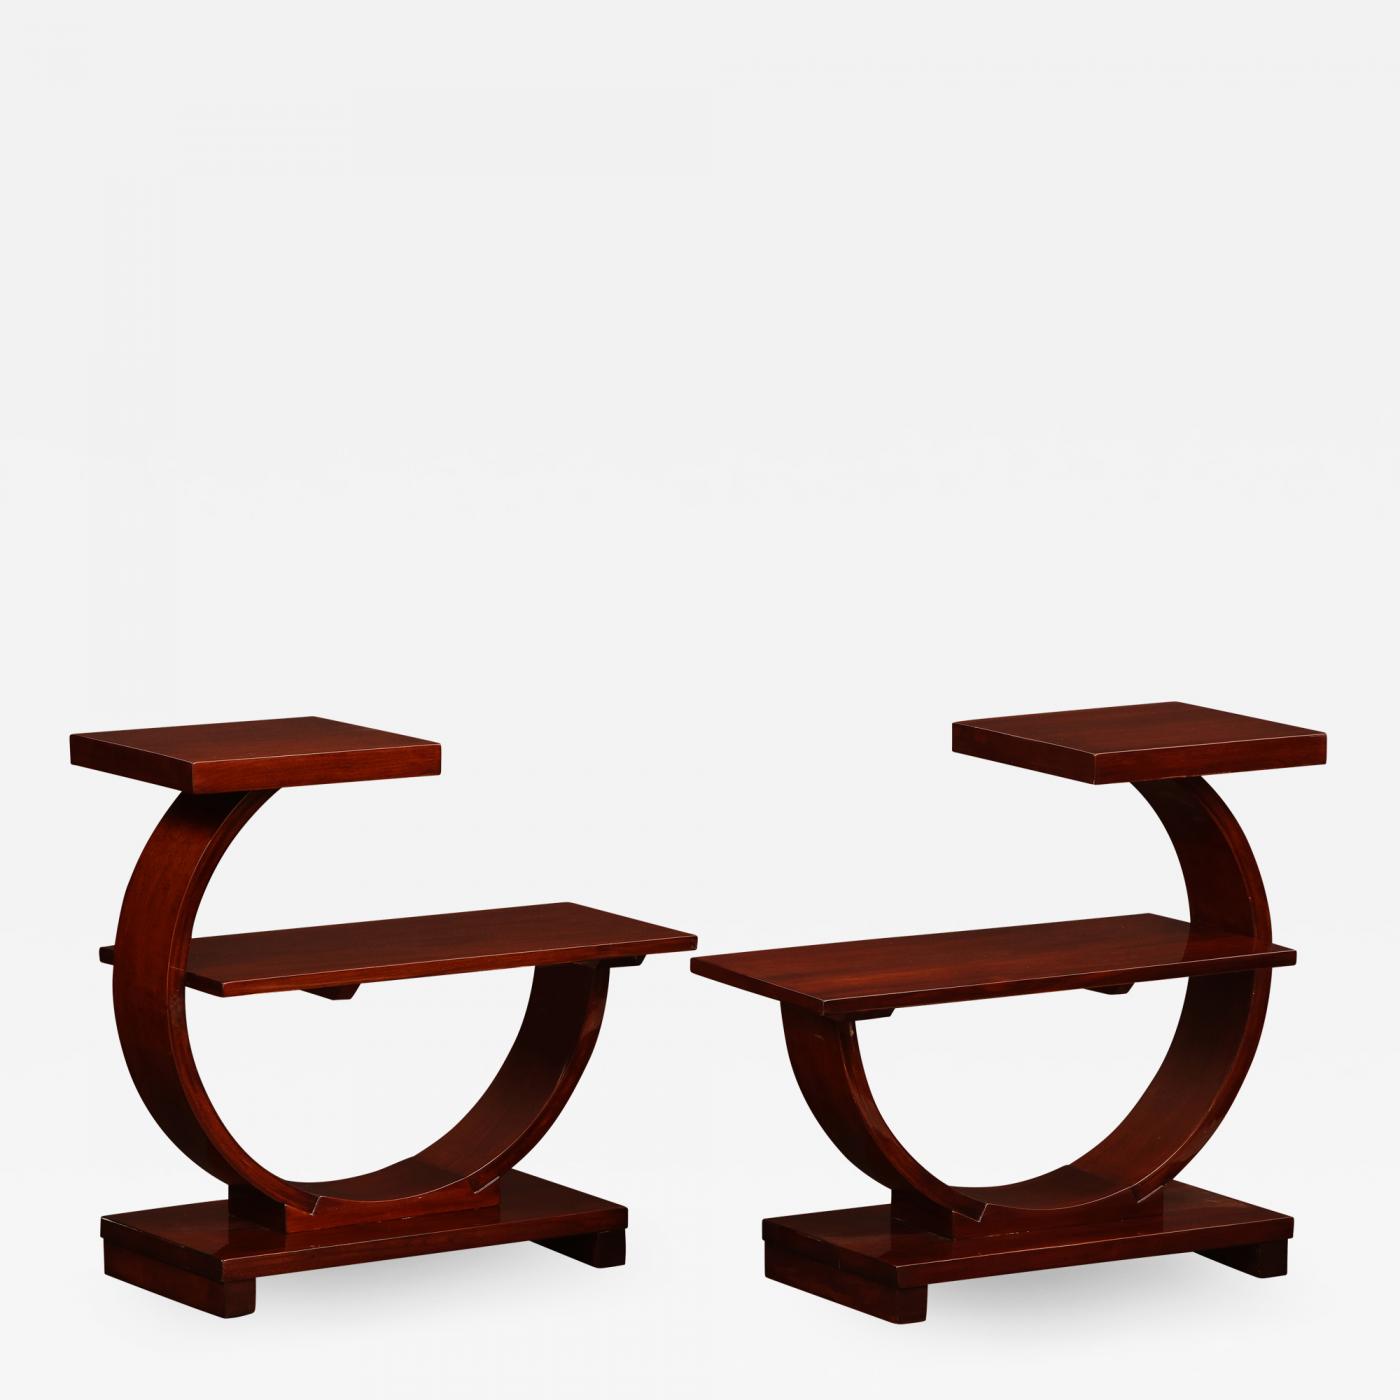 A pair of Modernist two-tier side tables.